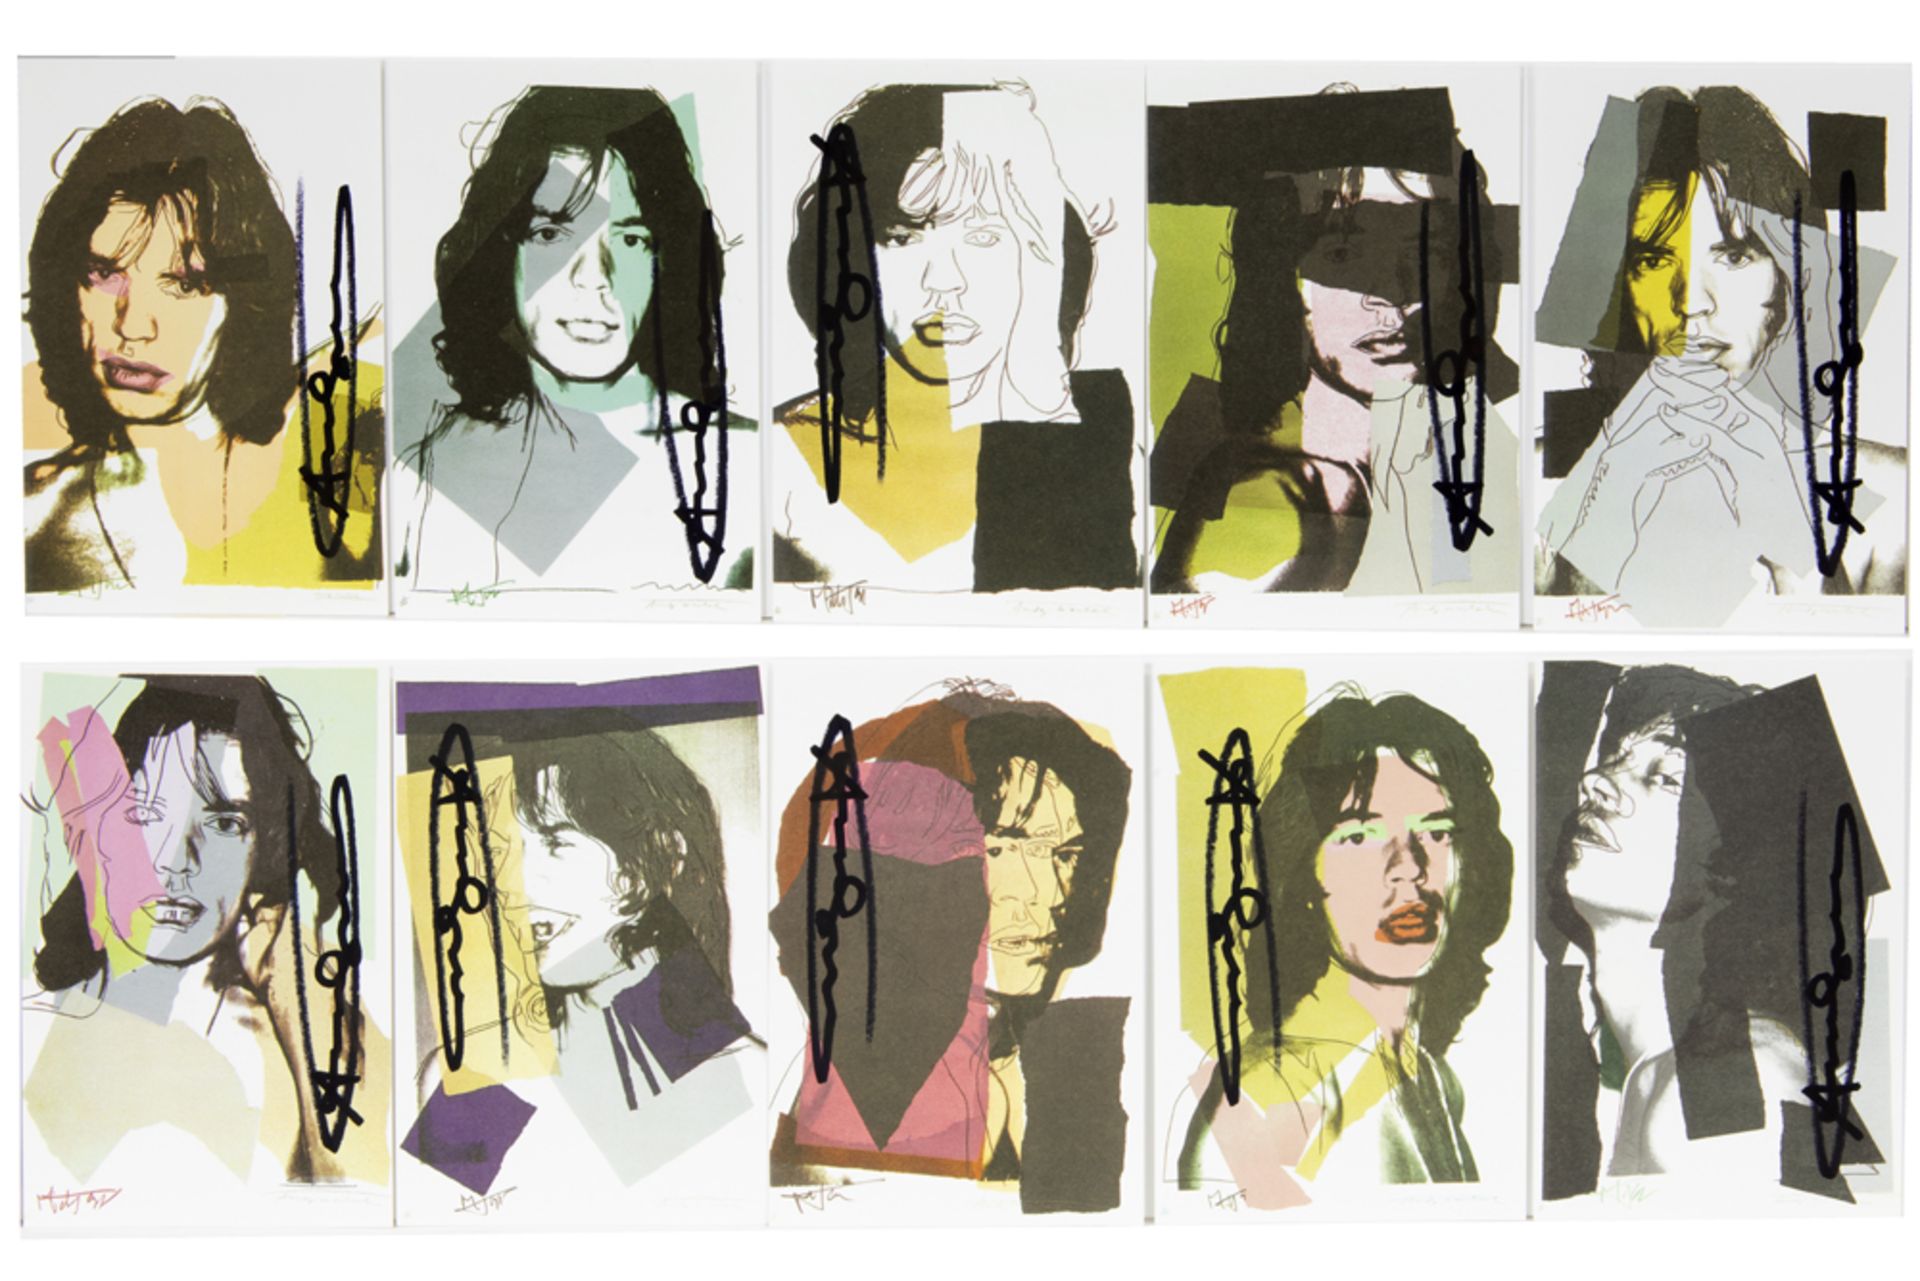 portfolio with a series of ten Andy Warhol signed silkscreens, each with a portrait of Mick